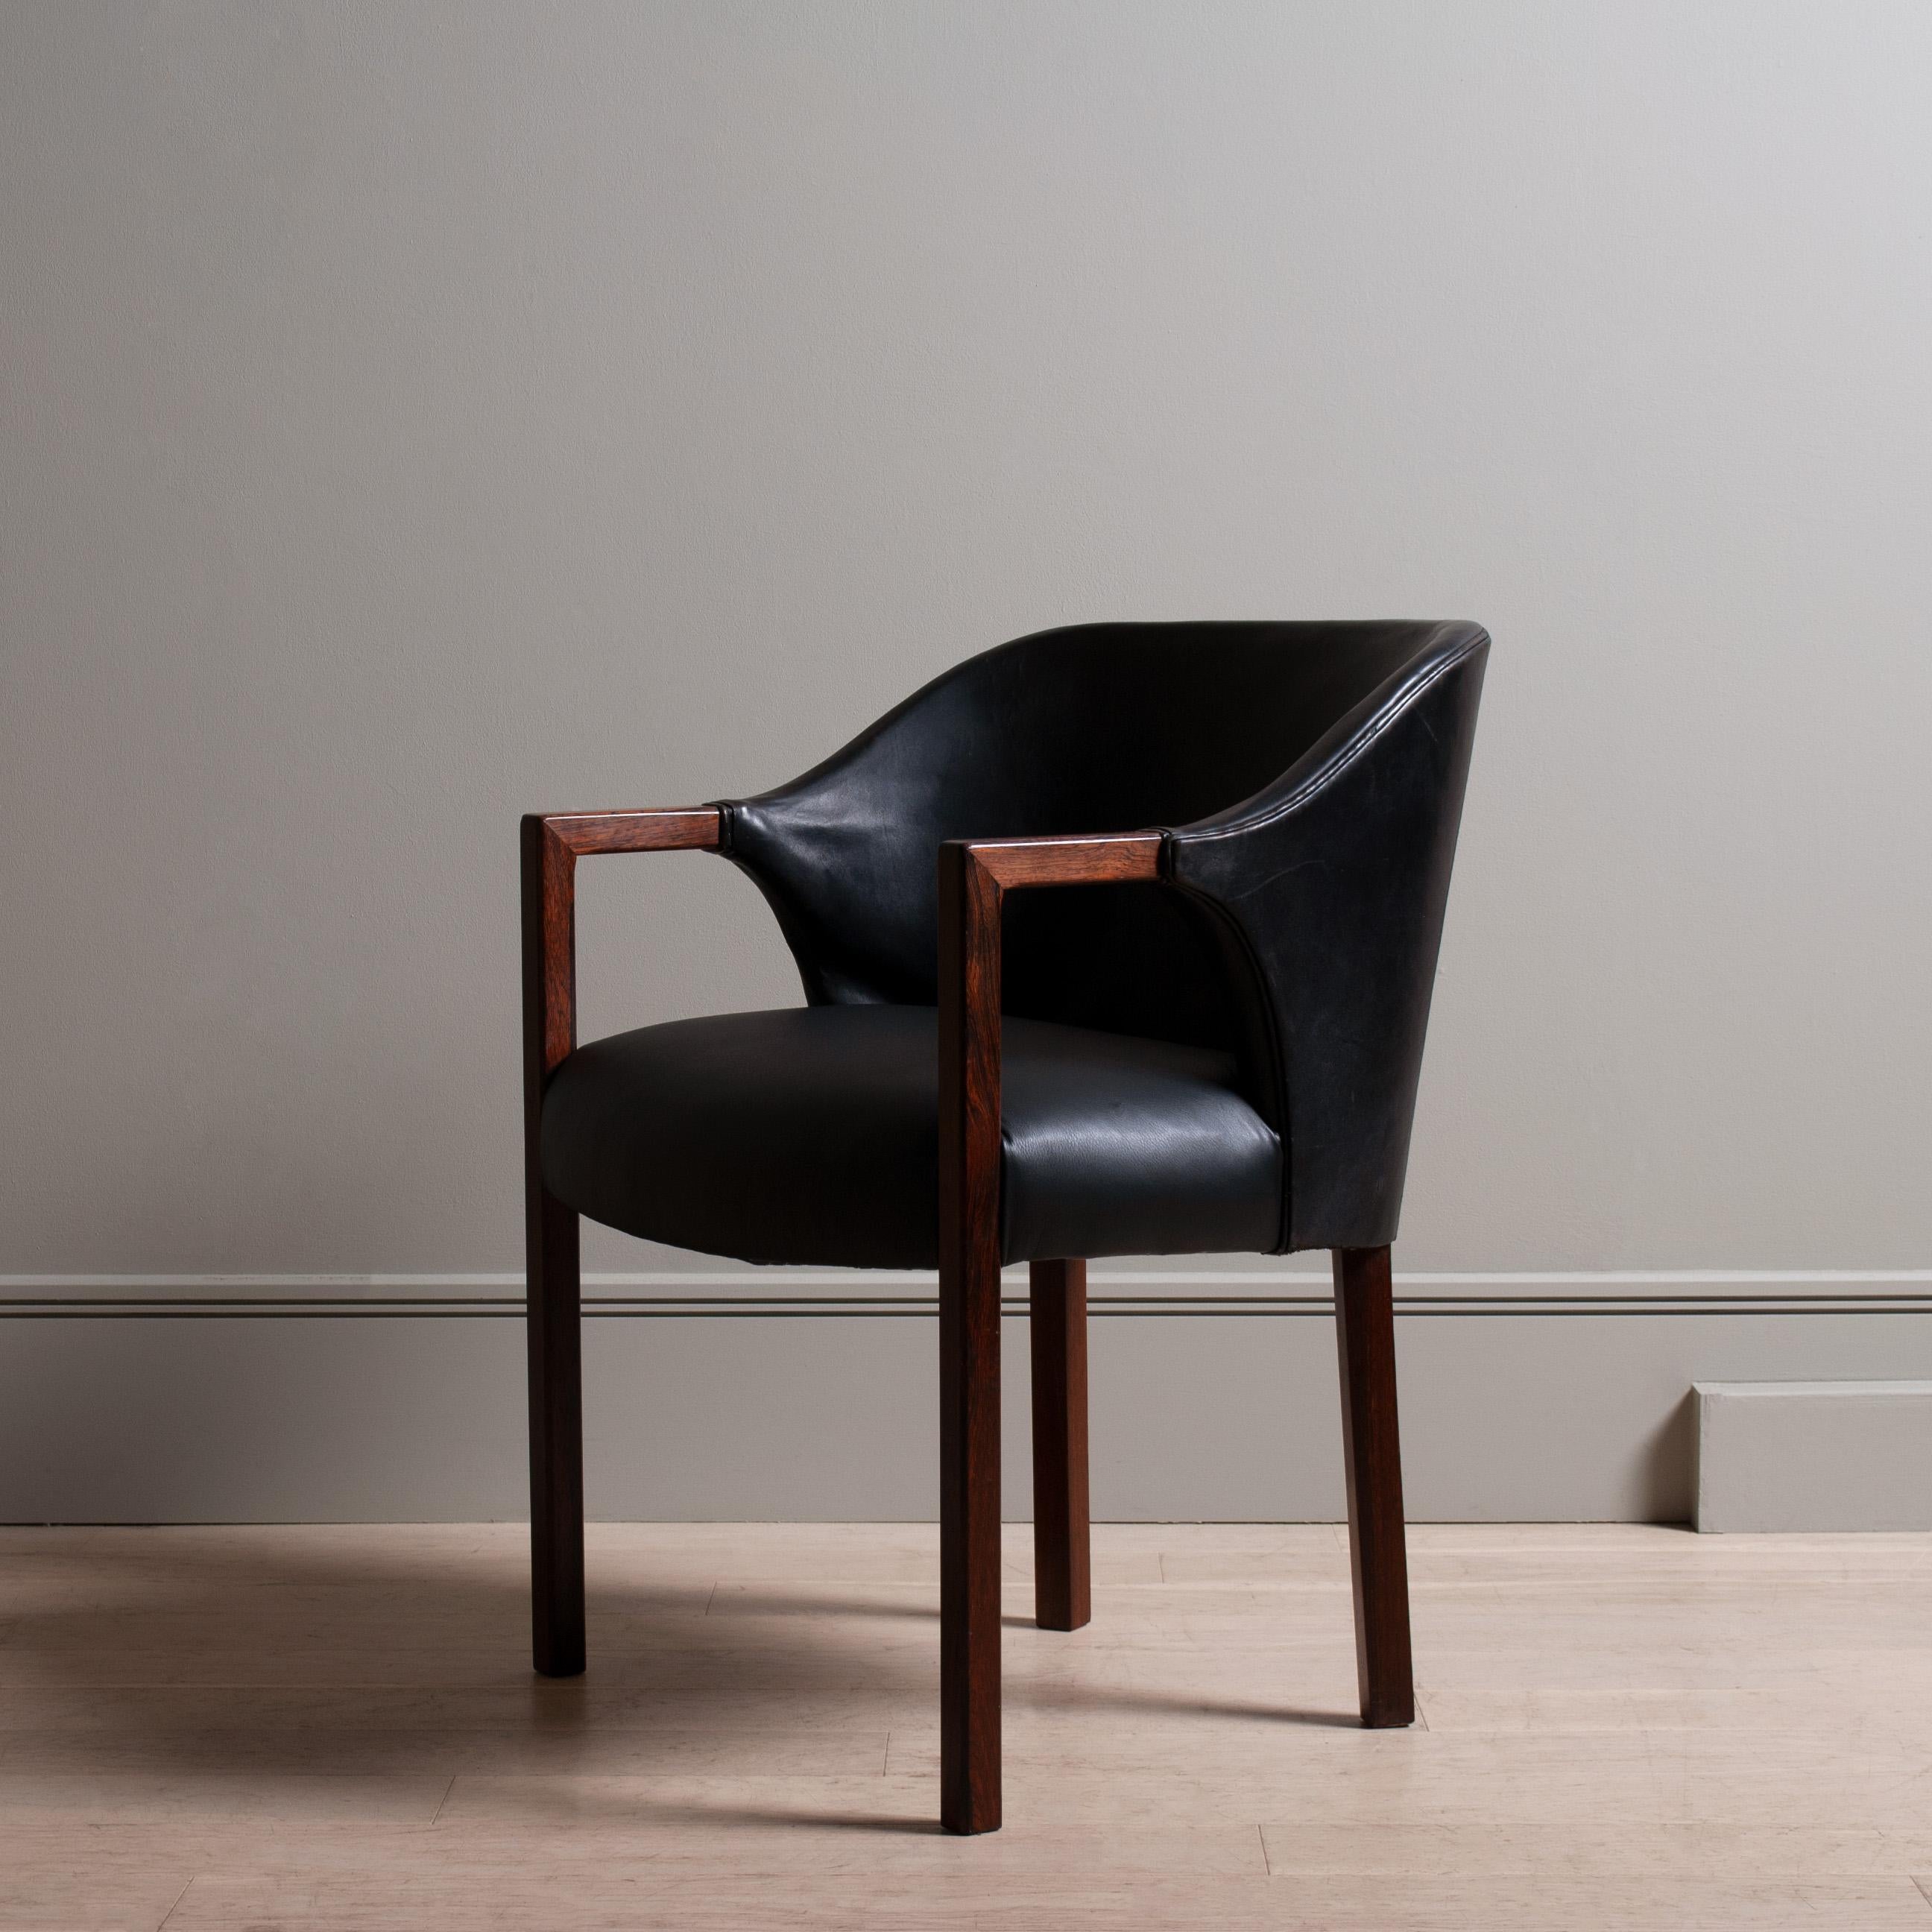 An incredibly unusual Danish design armchair of superb design, attributed to renowned furniture designer Jacob Kjaer. Perfectly angled mitre jointed arms leading to very unique sweeping original and patinated black leather upholstery. Created in the